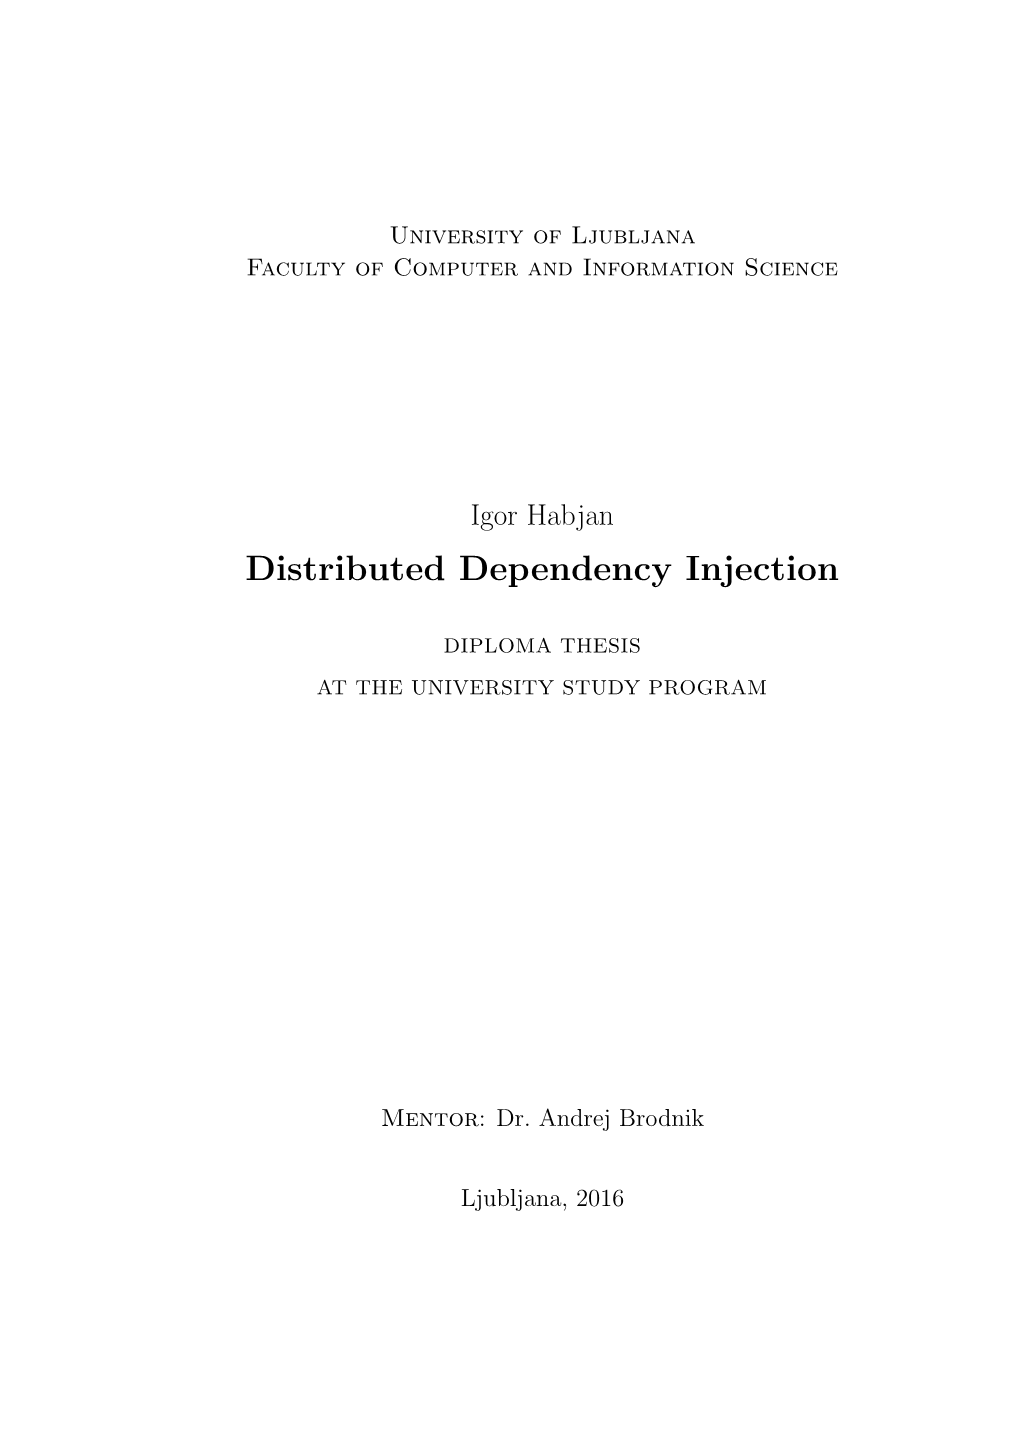 Distributed Dependency Injection